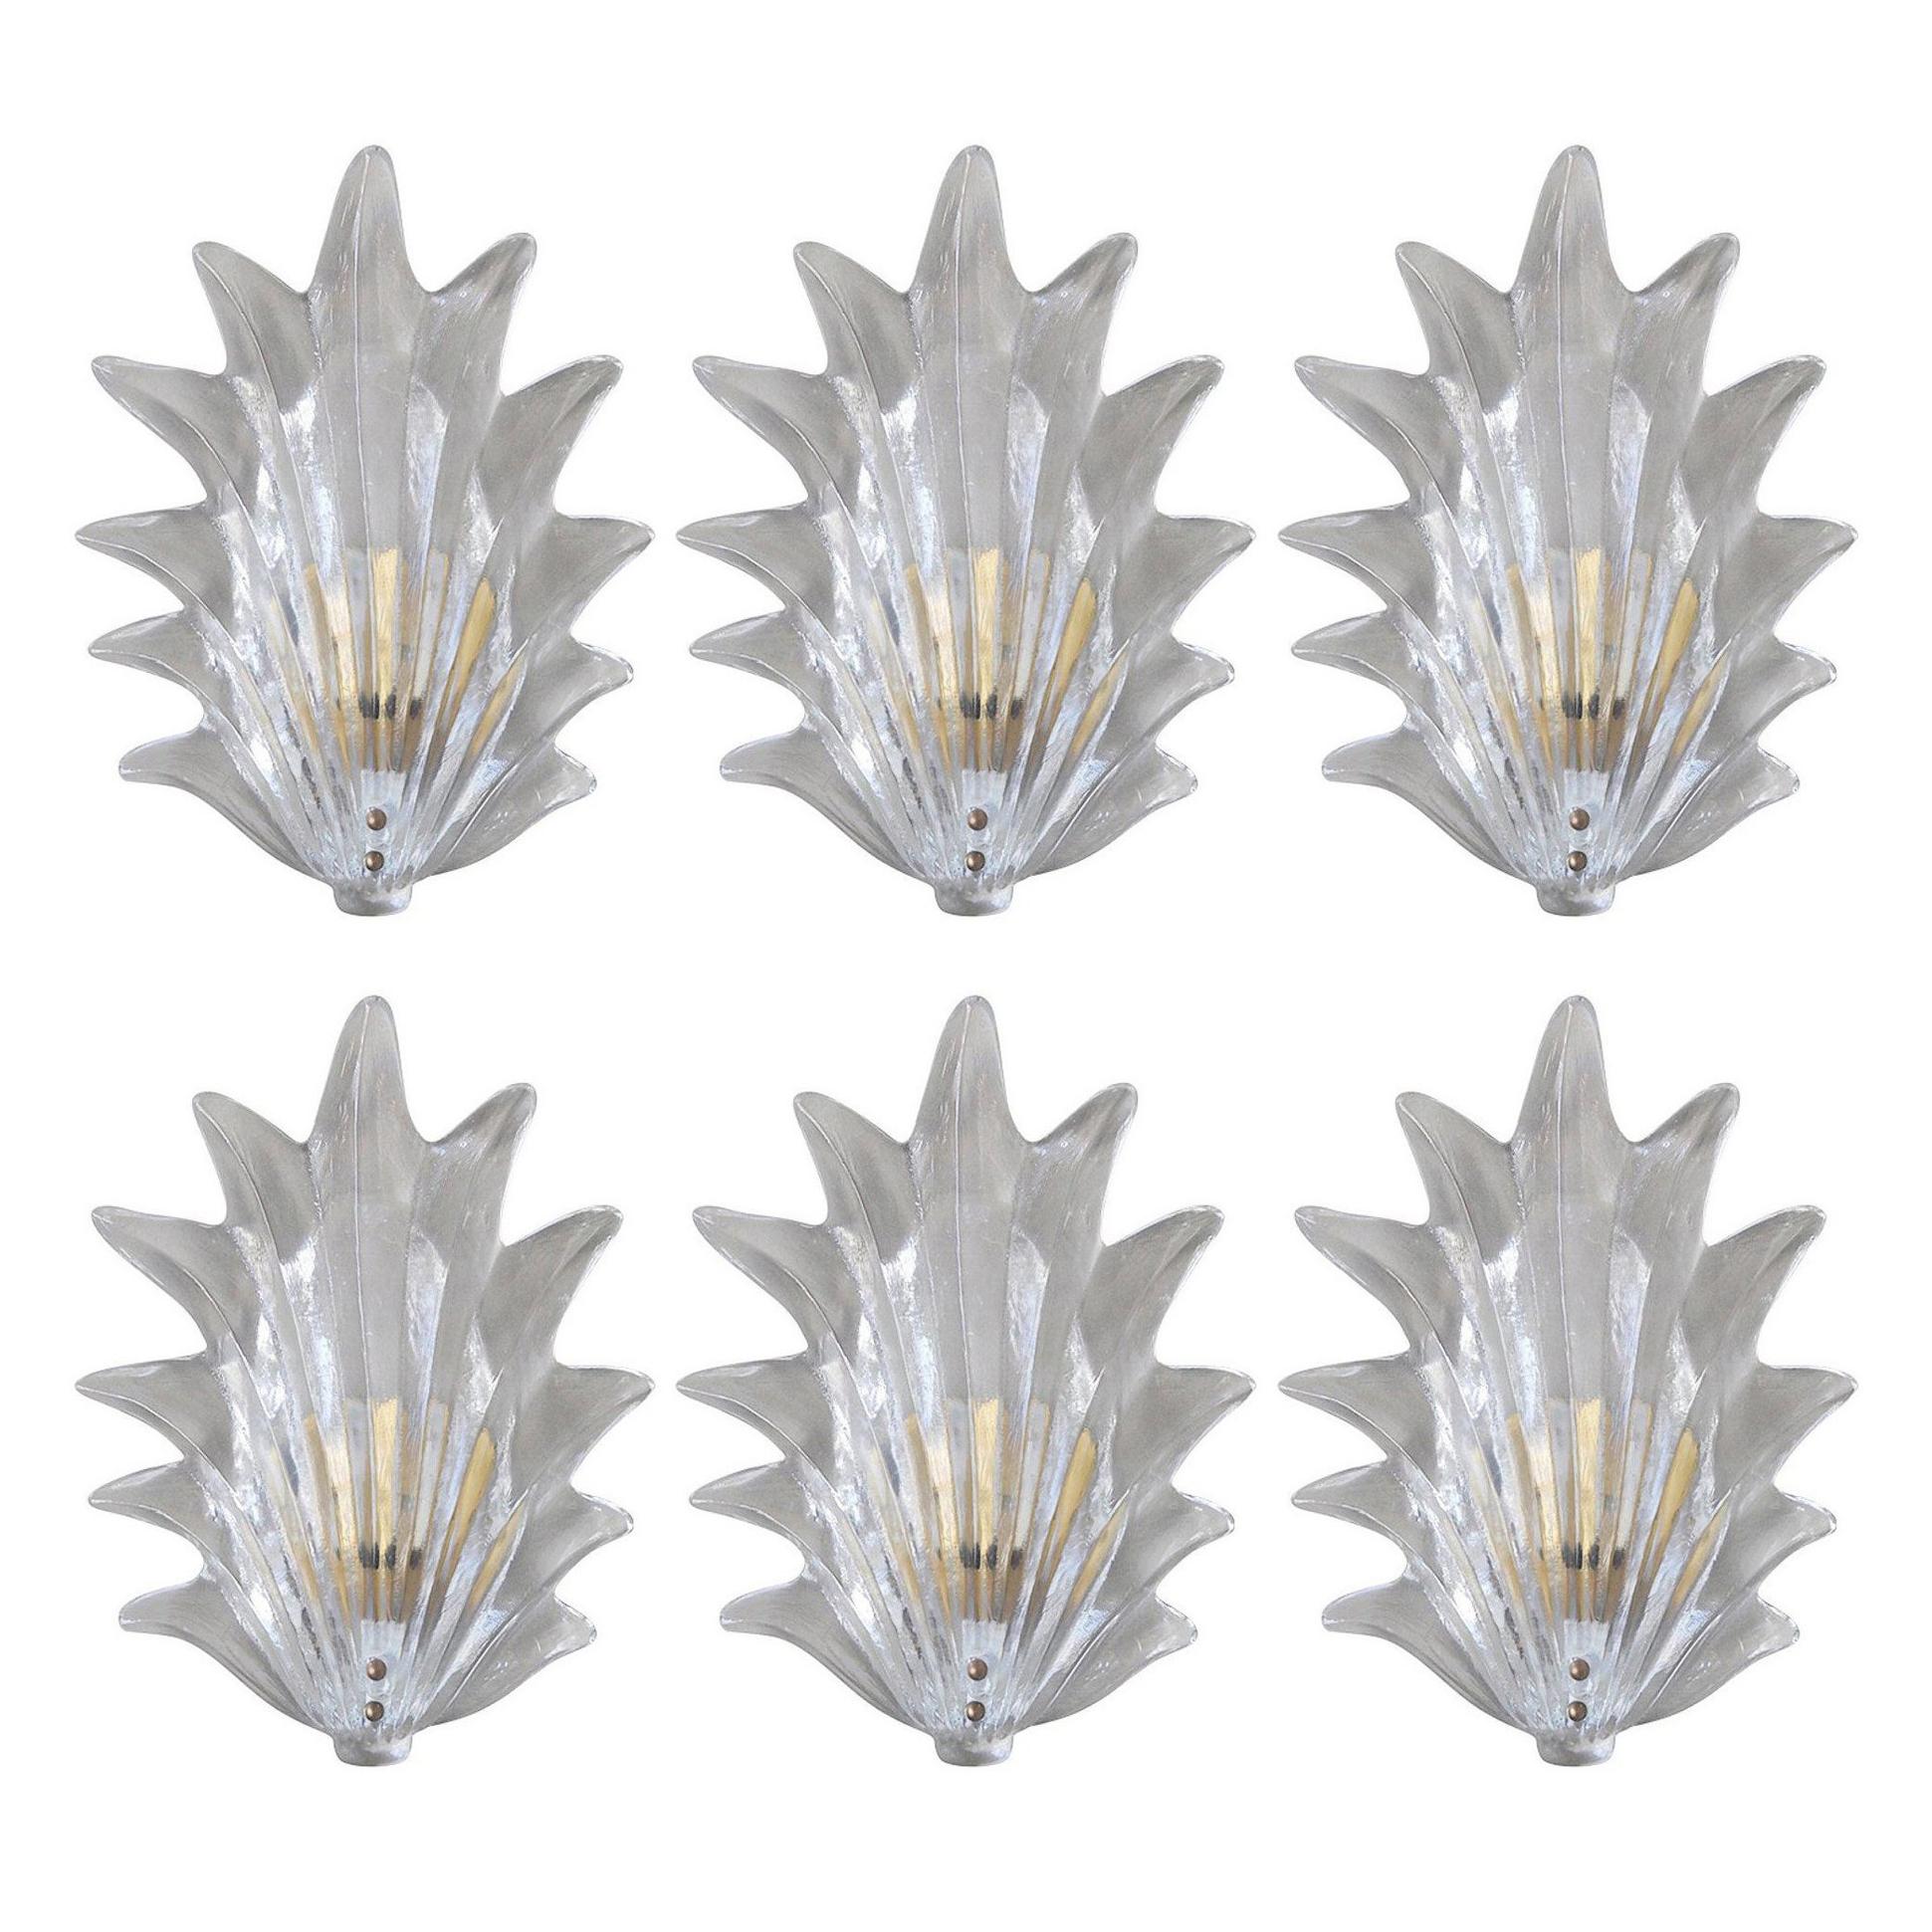 Six Art Deco Leaf Sconces by Barovier e Toso